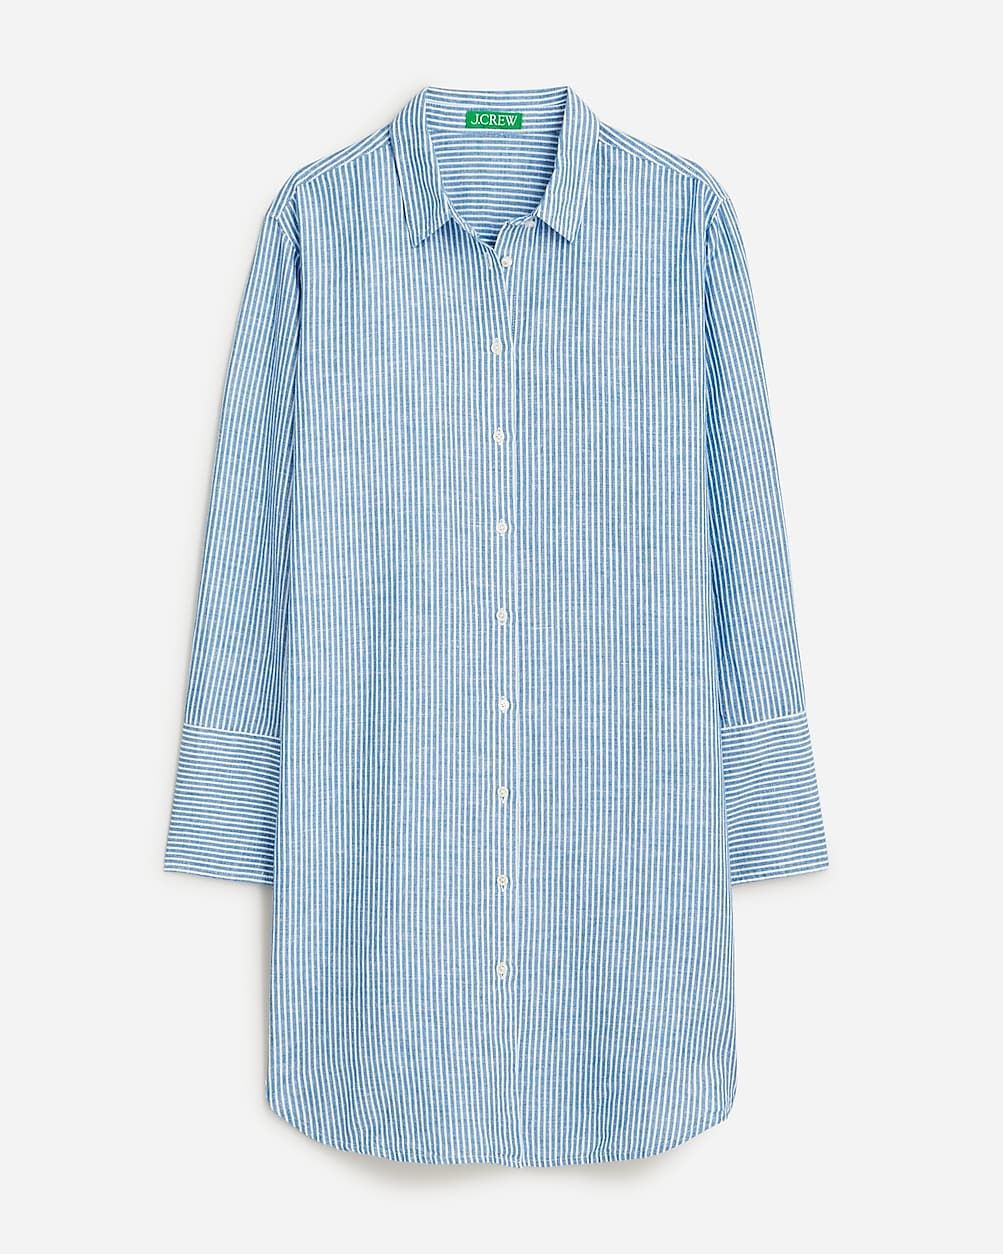 Relaxed-fit beach shirt in striped linen-cotton blend | J.Crew US